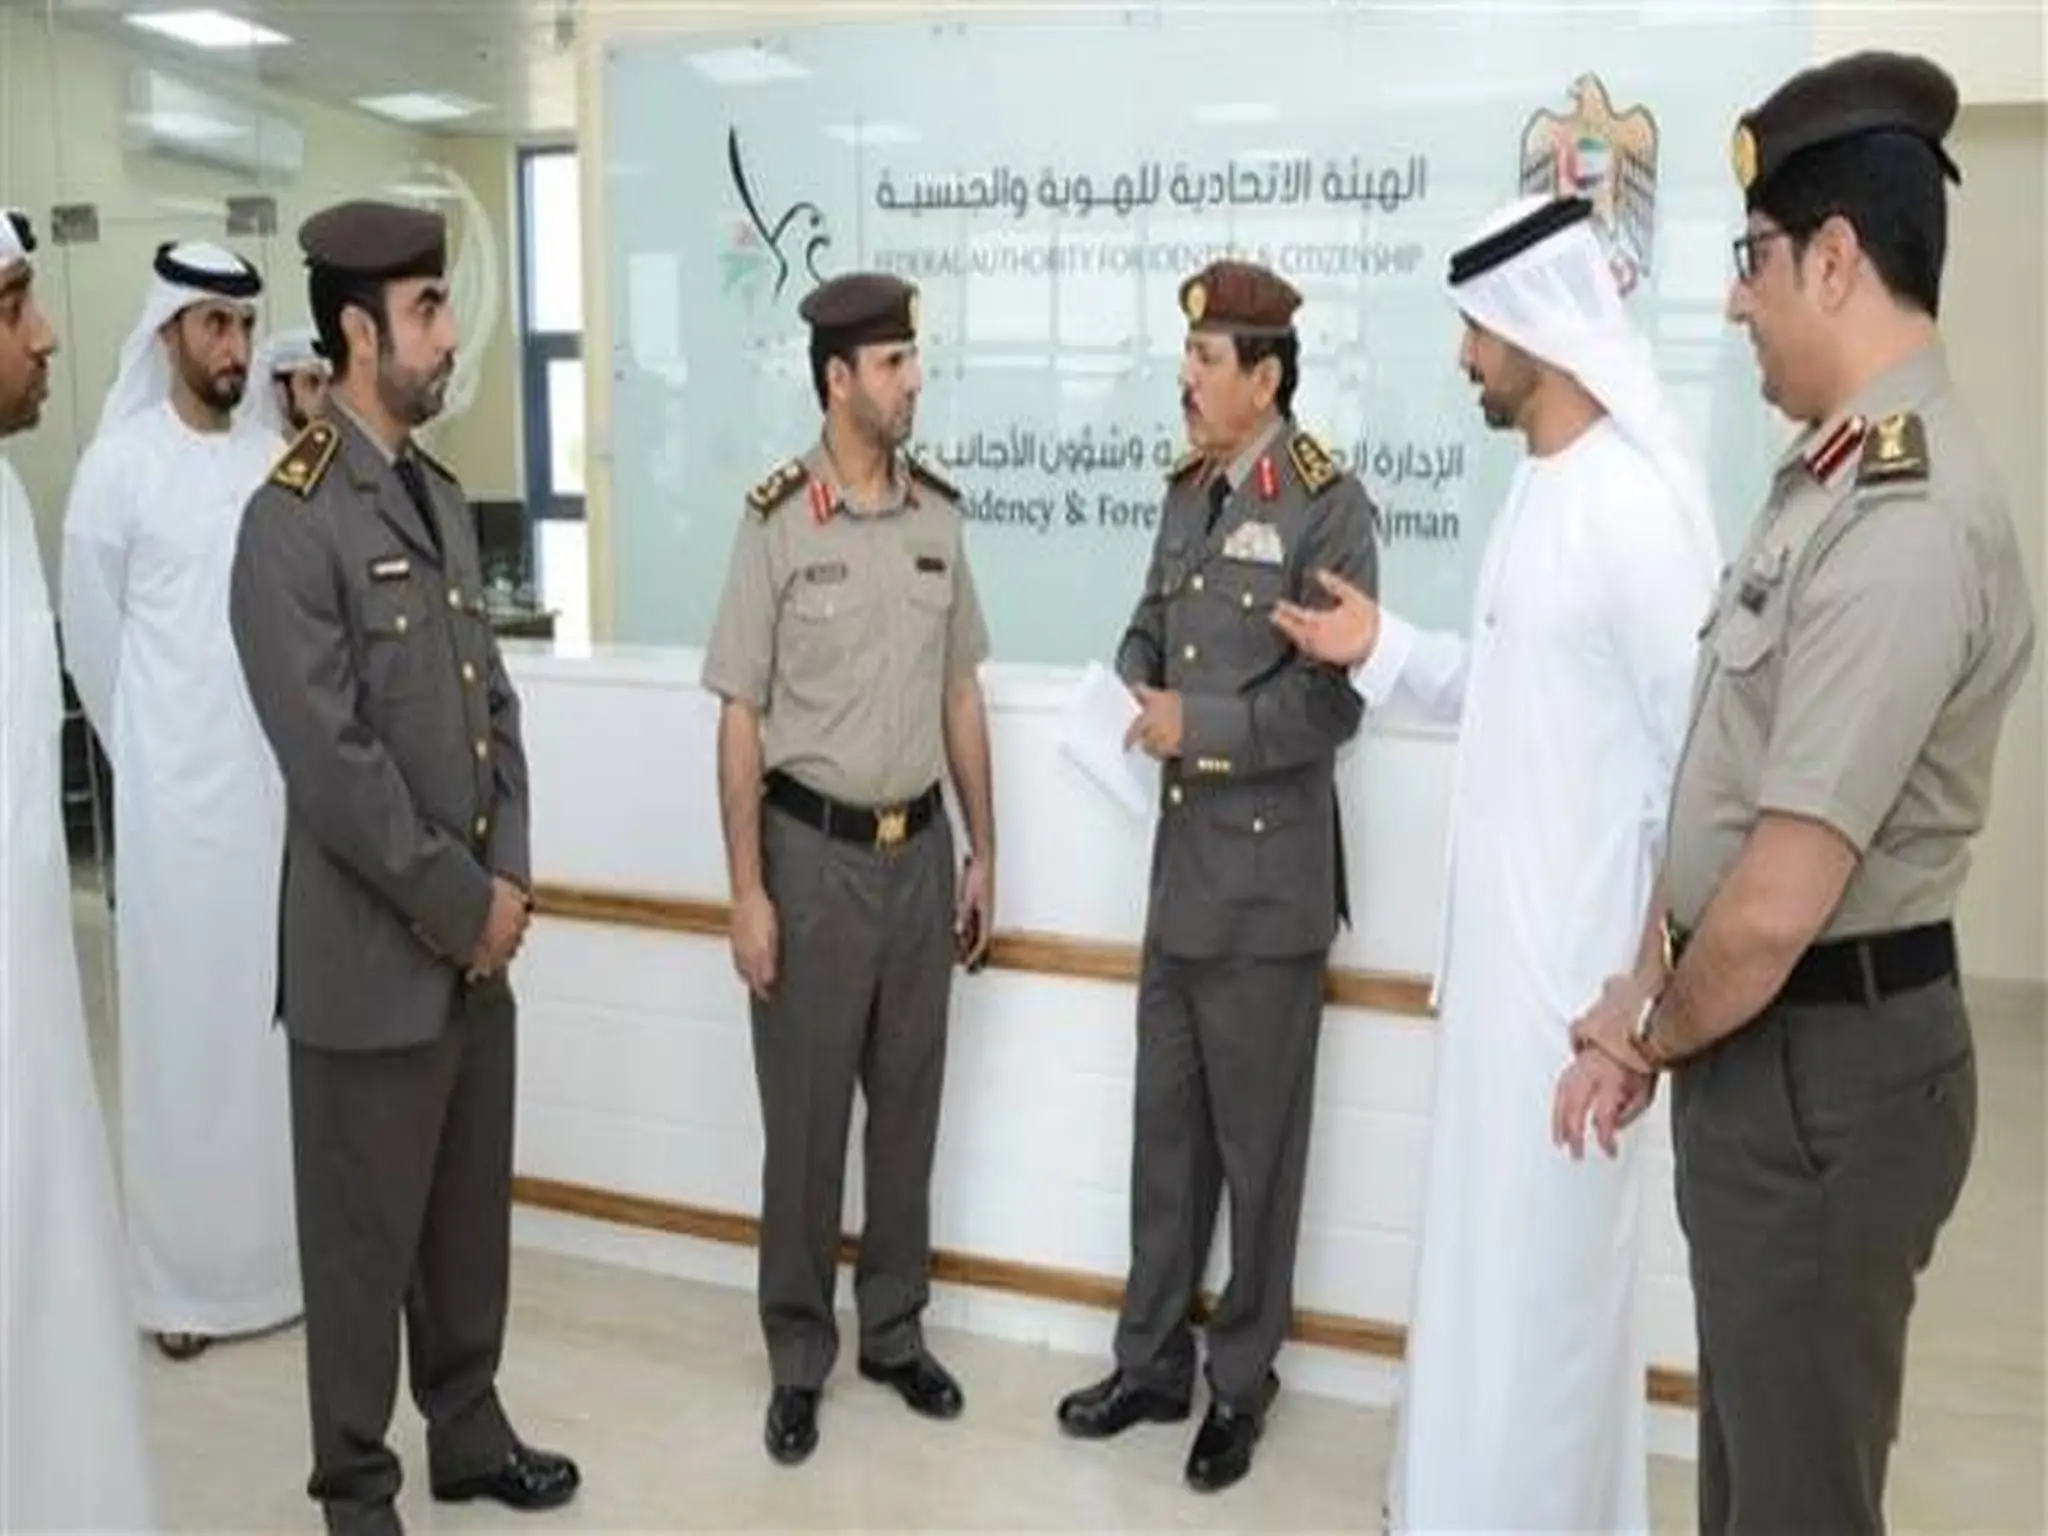 UAE: Updating the entry protocol for those coming to the country through these ports